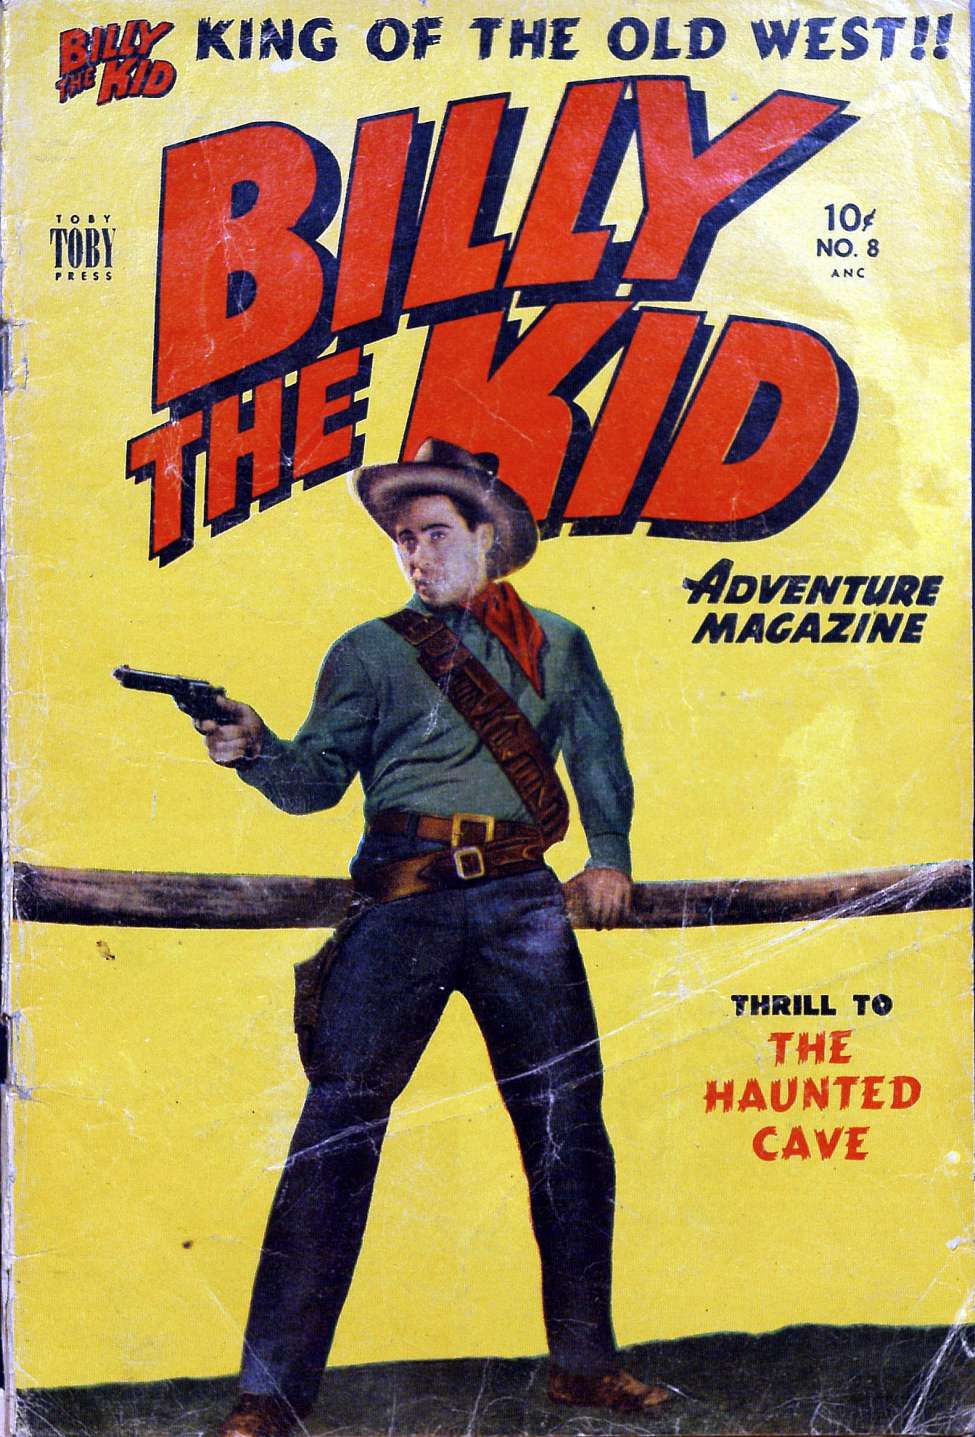 Book Cover For Billy the Kid Adventure Magazine 8